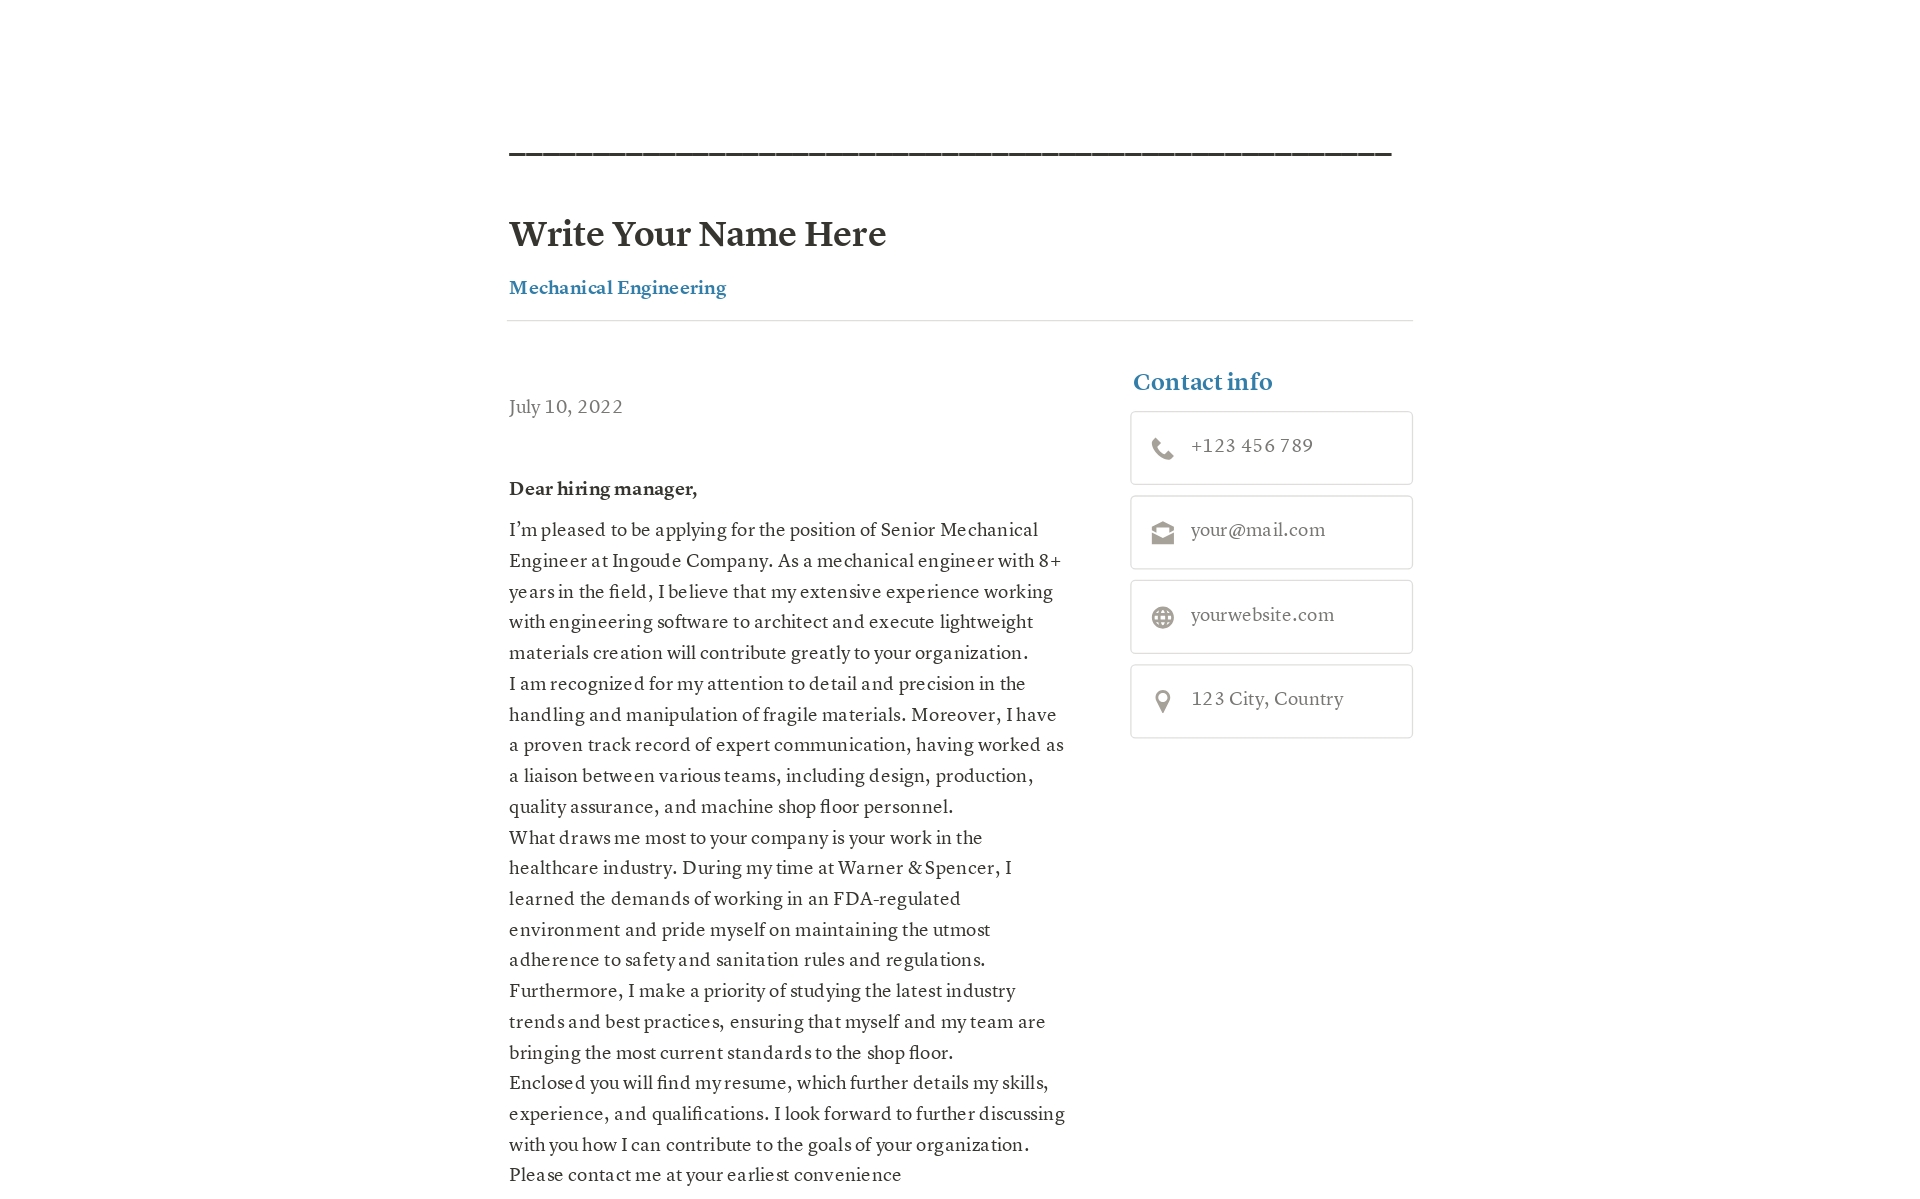 Resume + Cover Letter Notion templates for Your New Way to Job Application.